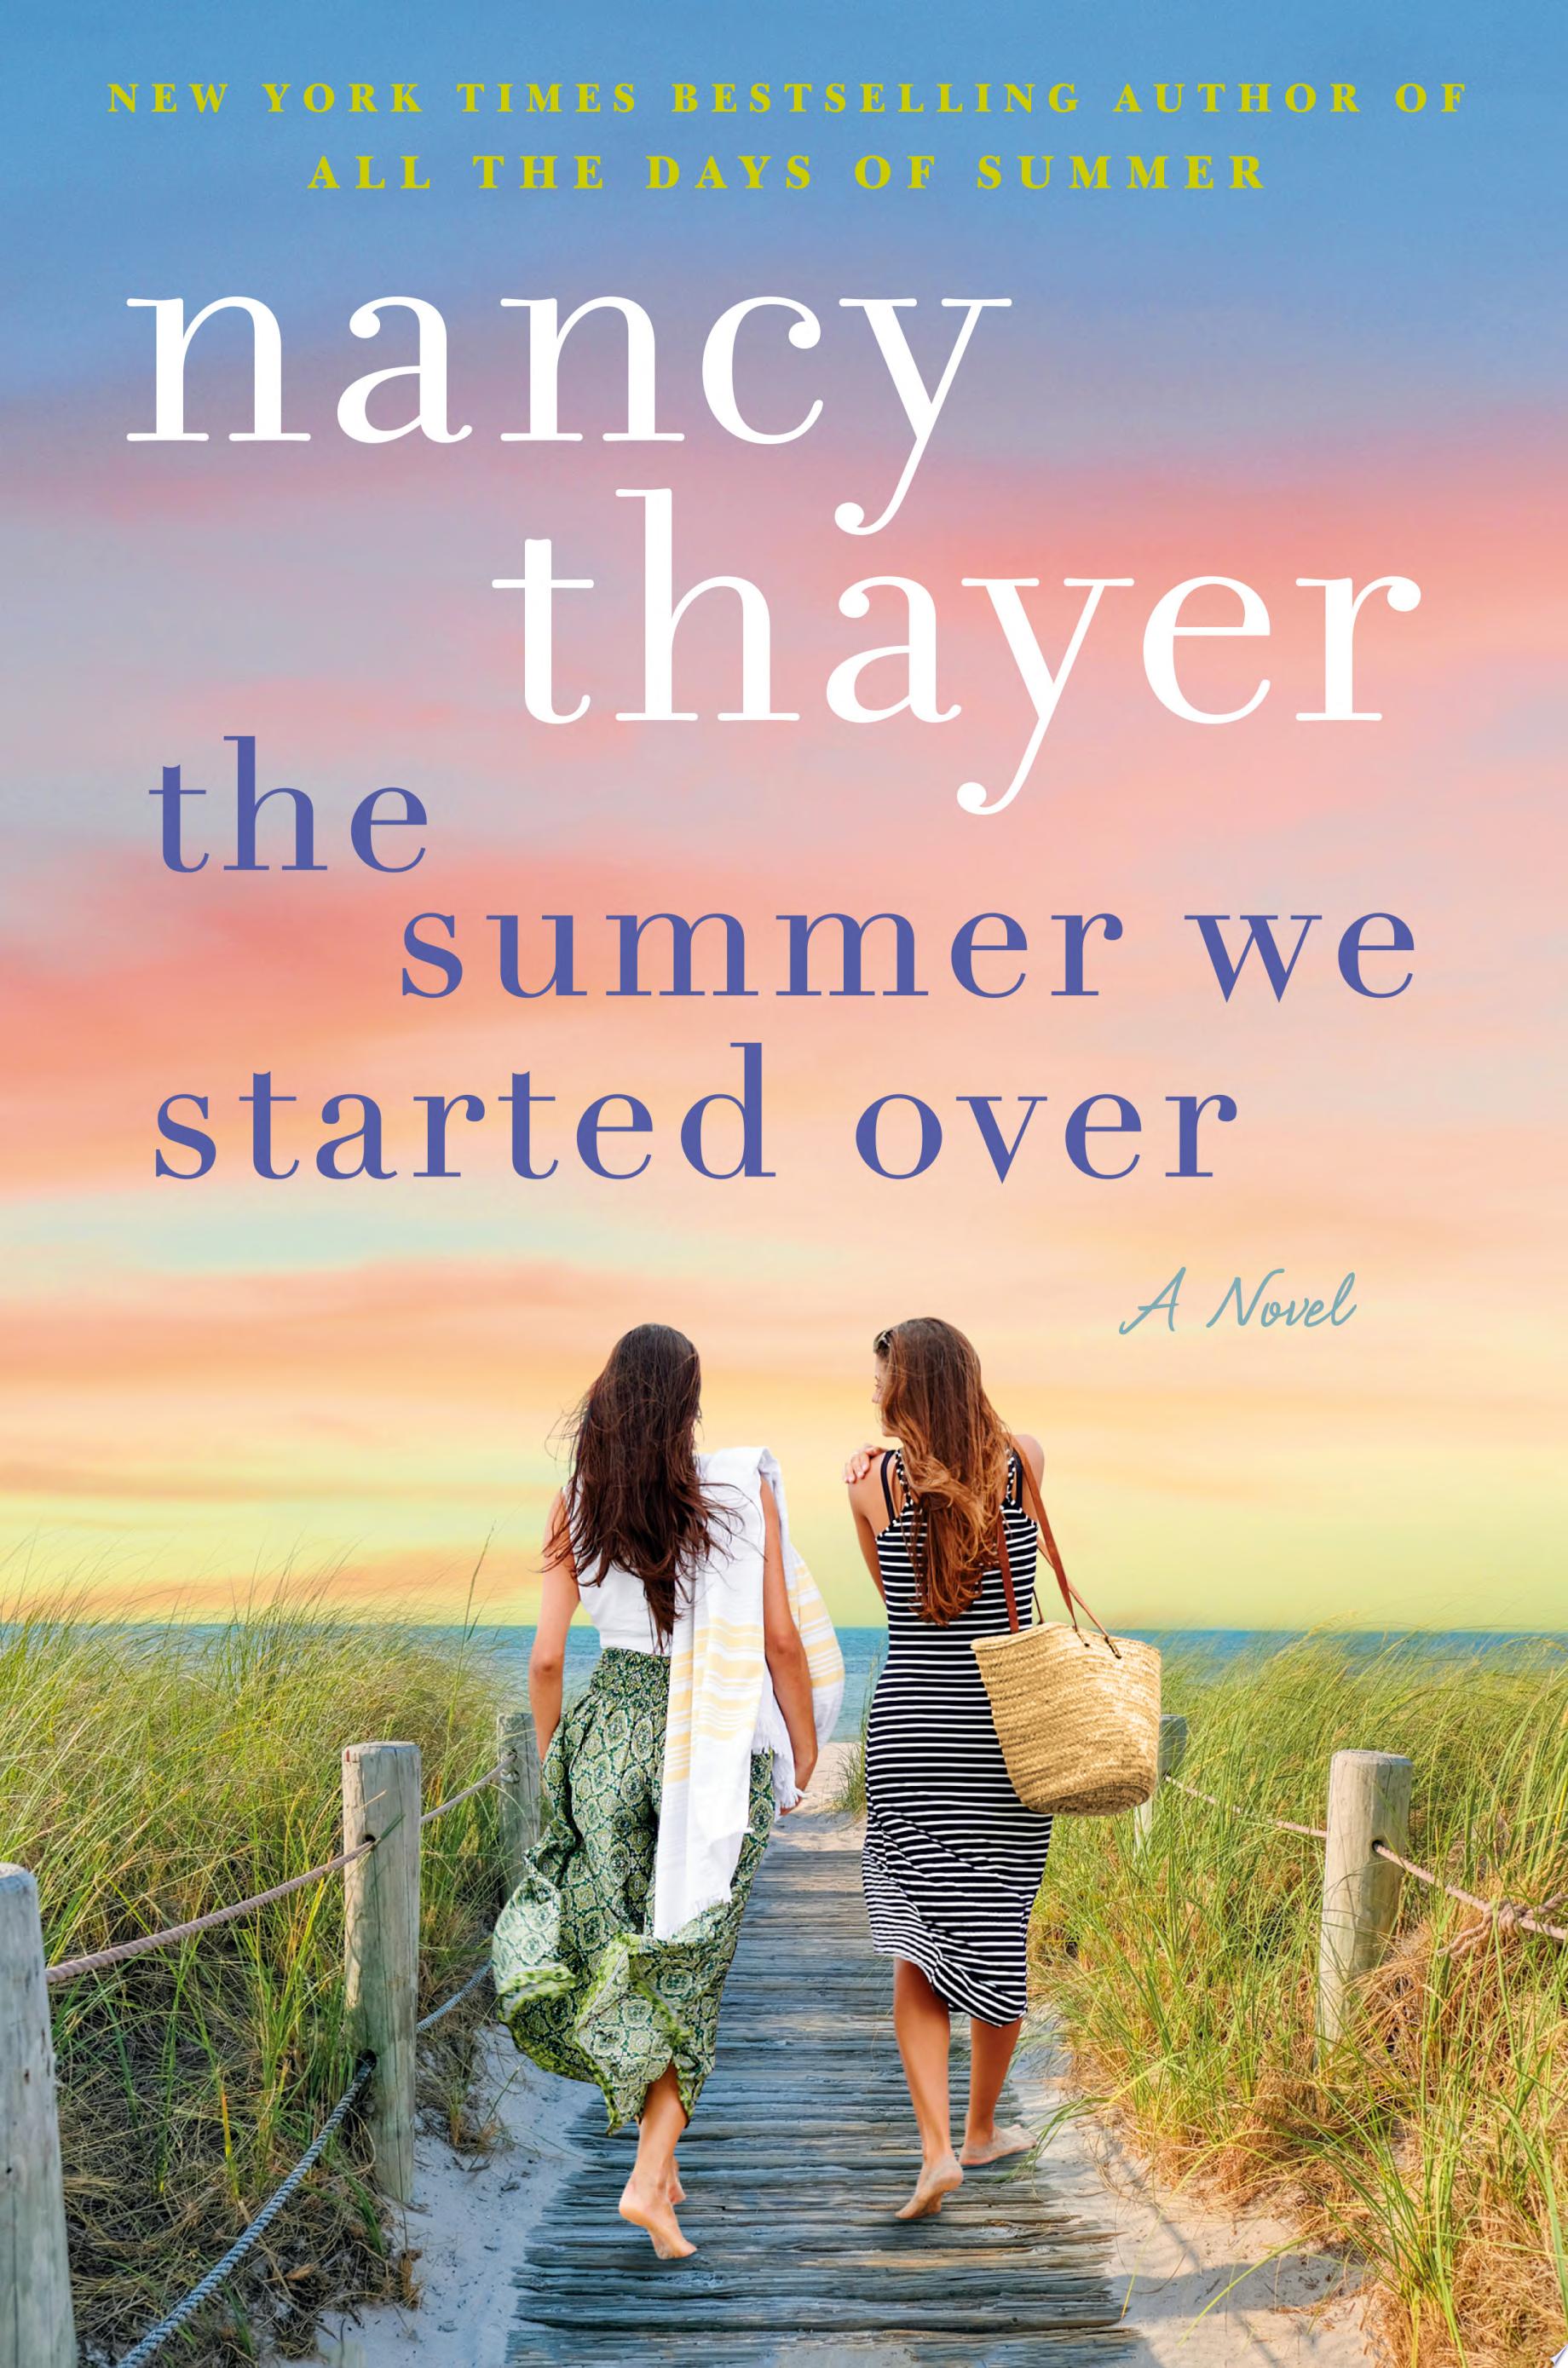 Image for "The Summer We Started Over"